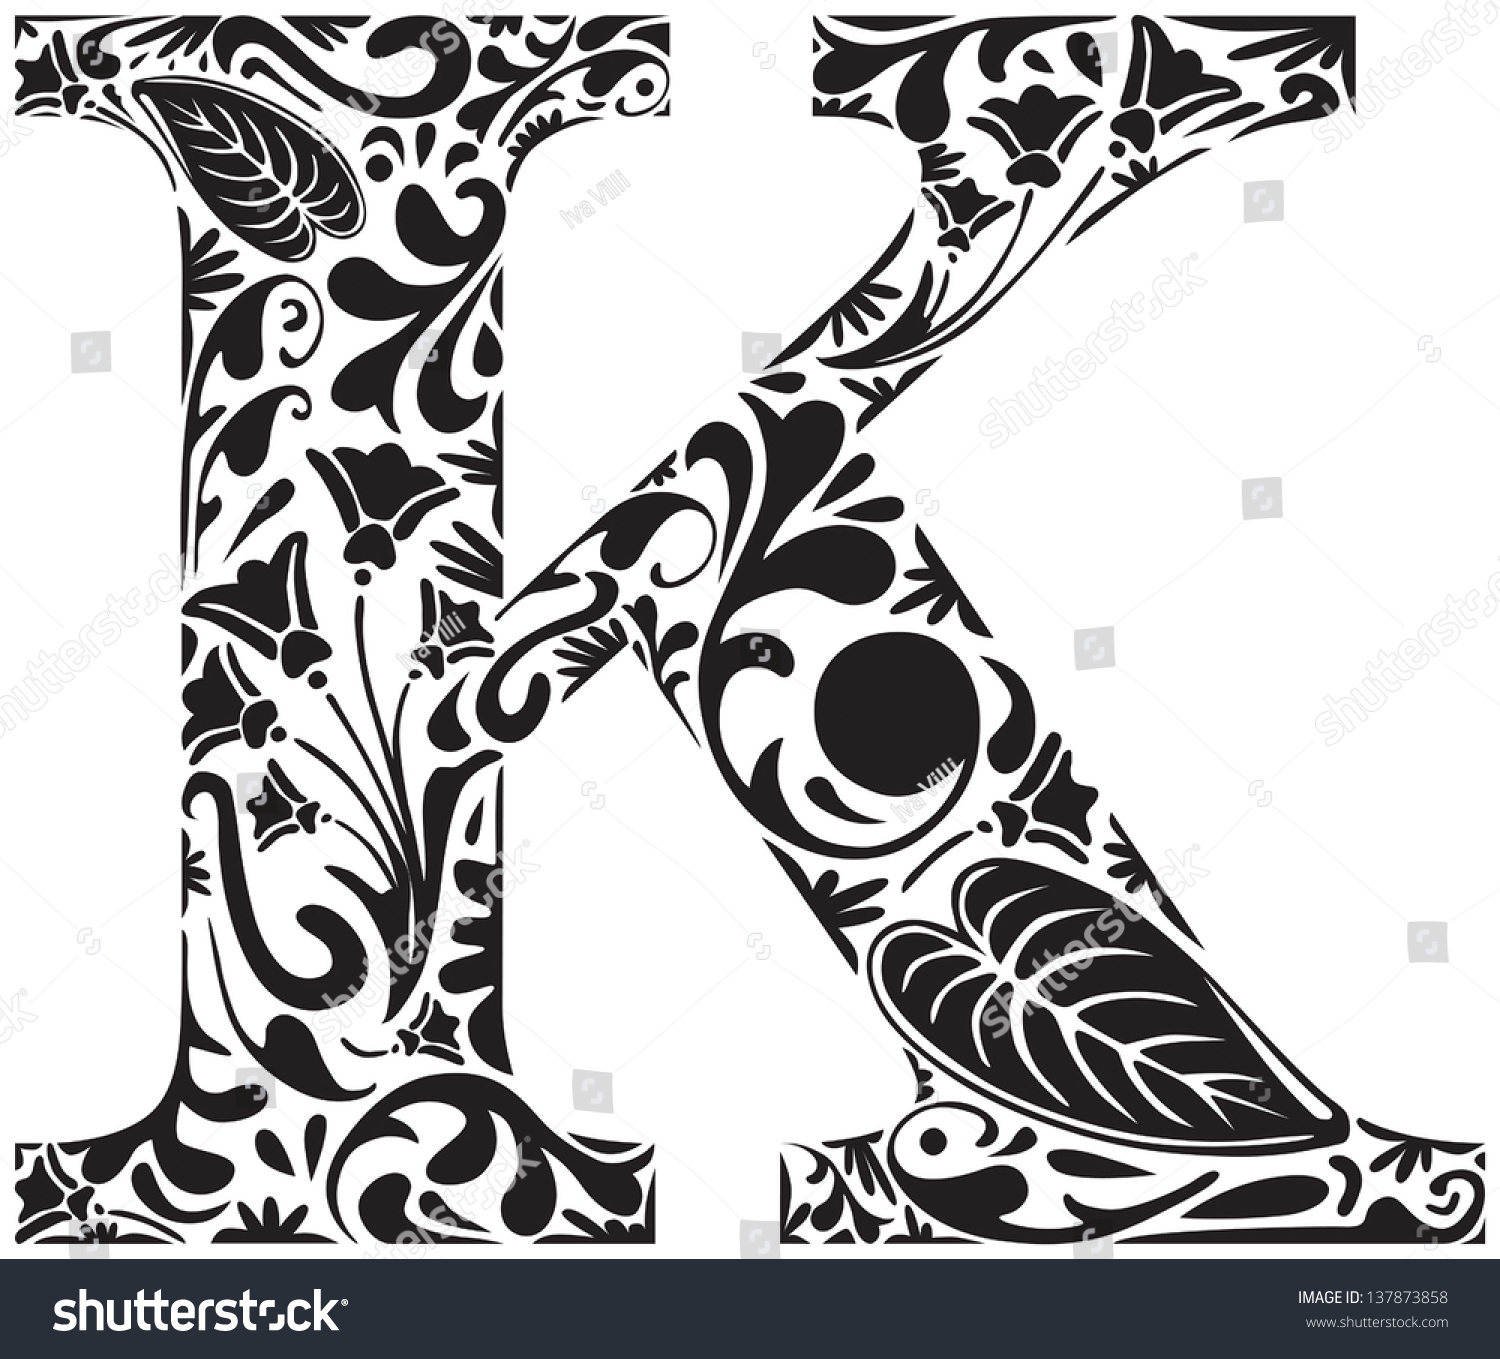 Download Floral Initial Capital Letter K Stock Vector 137873858 - Shutterstock